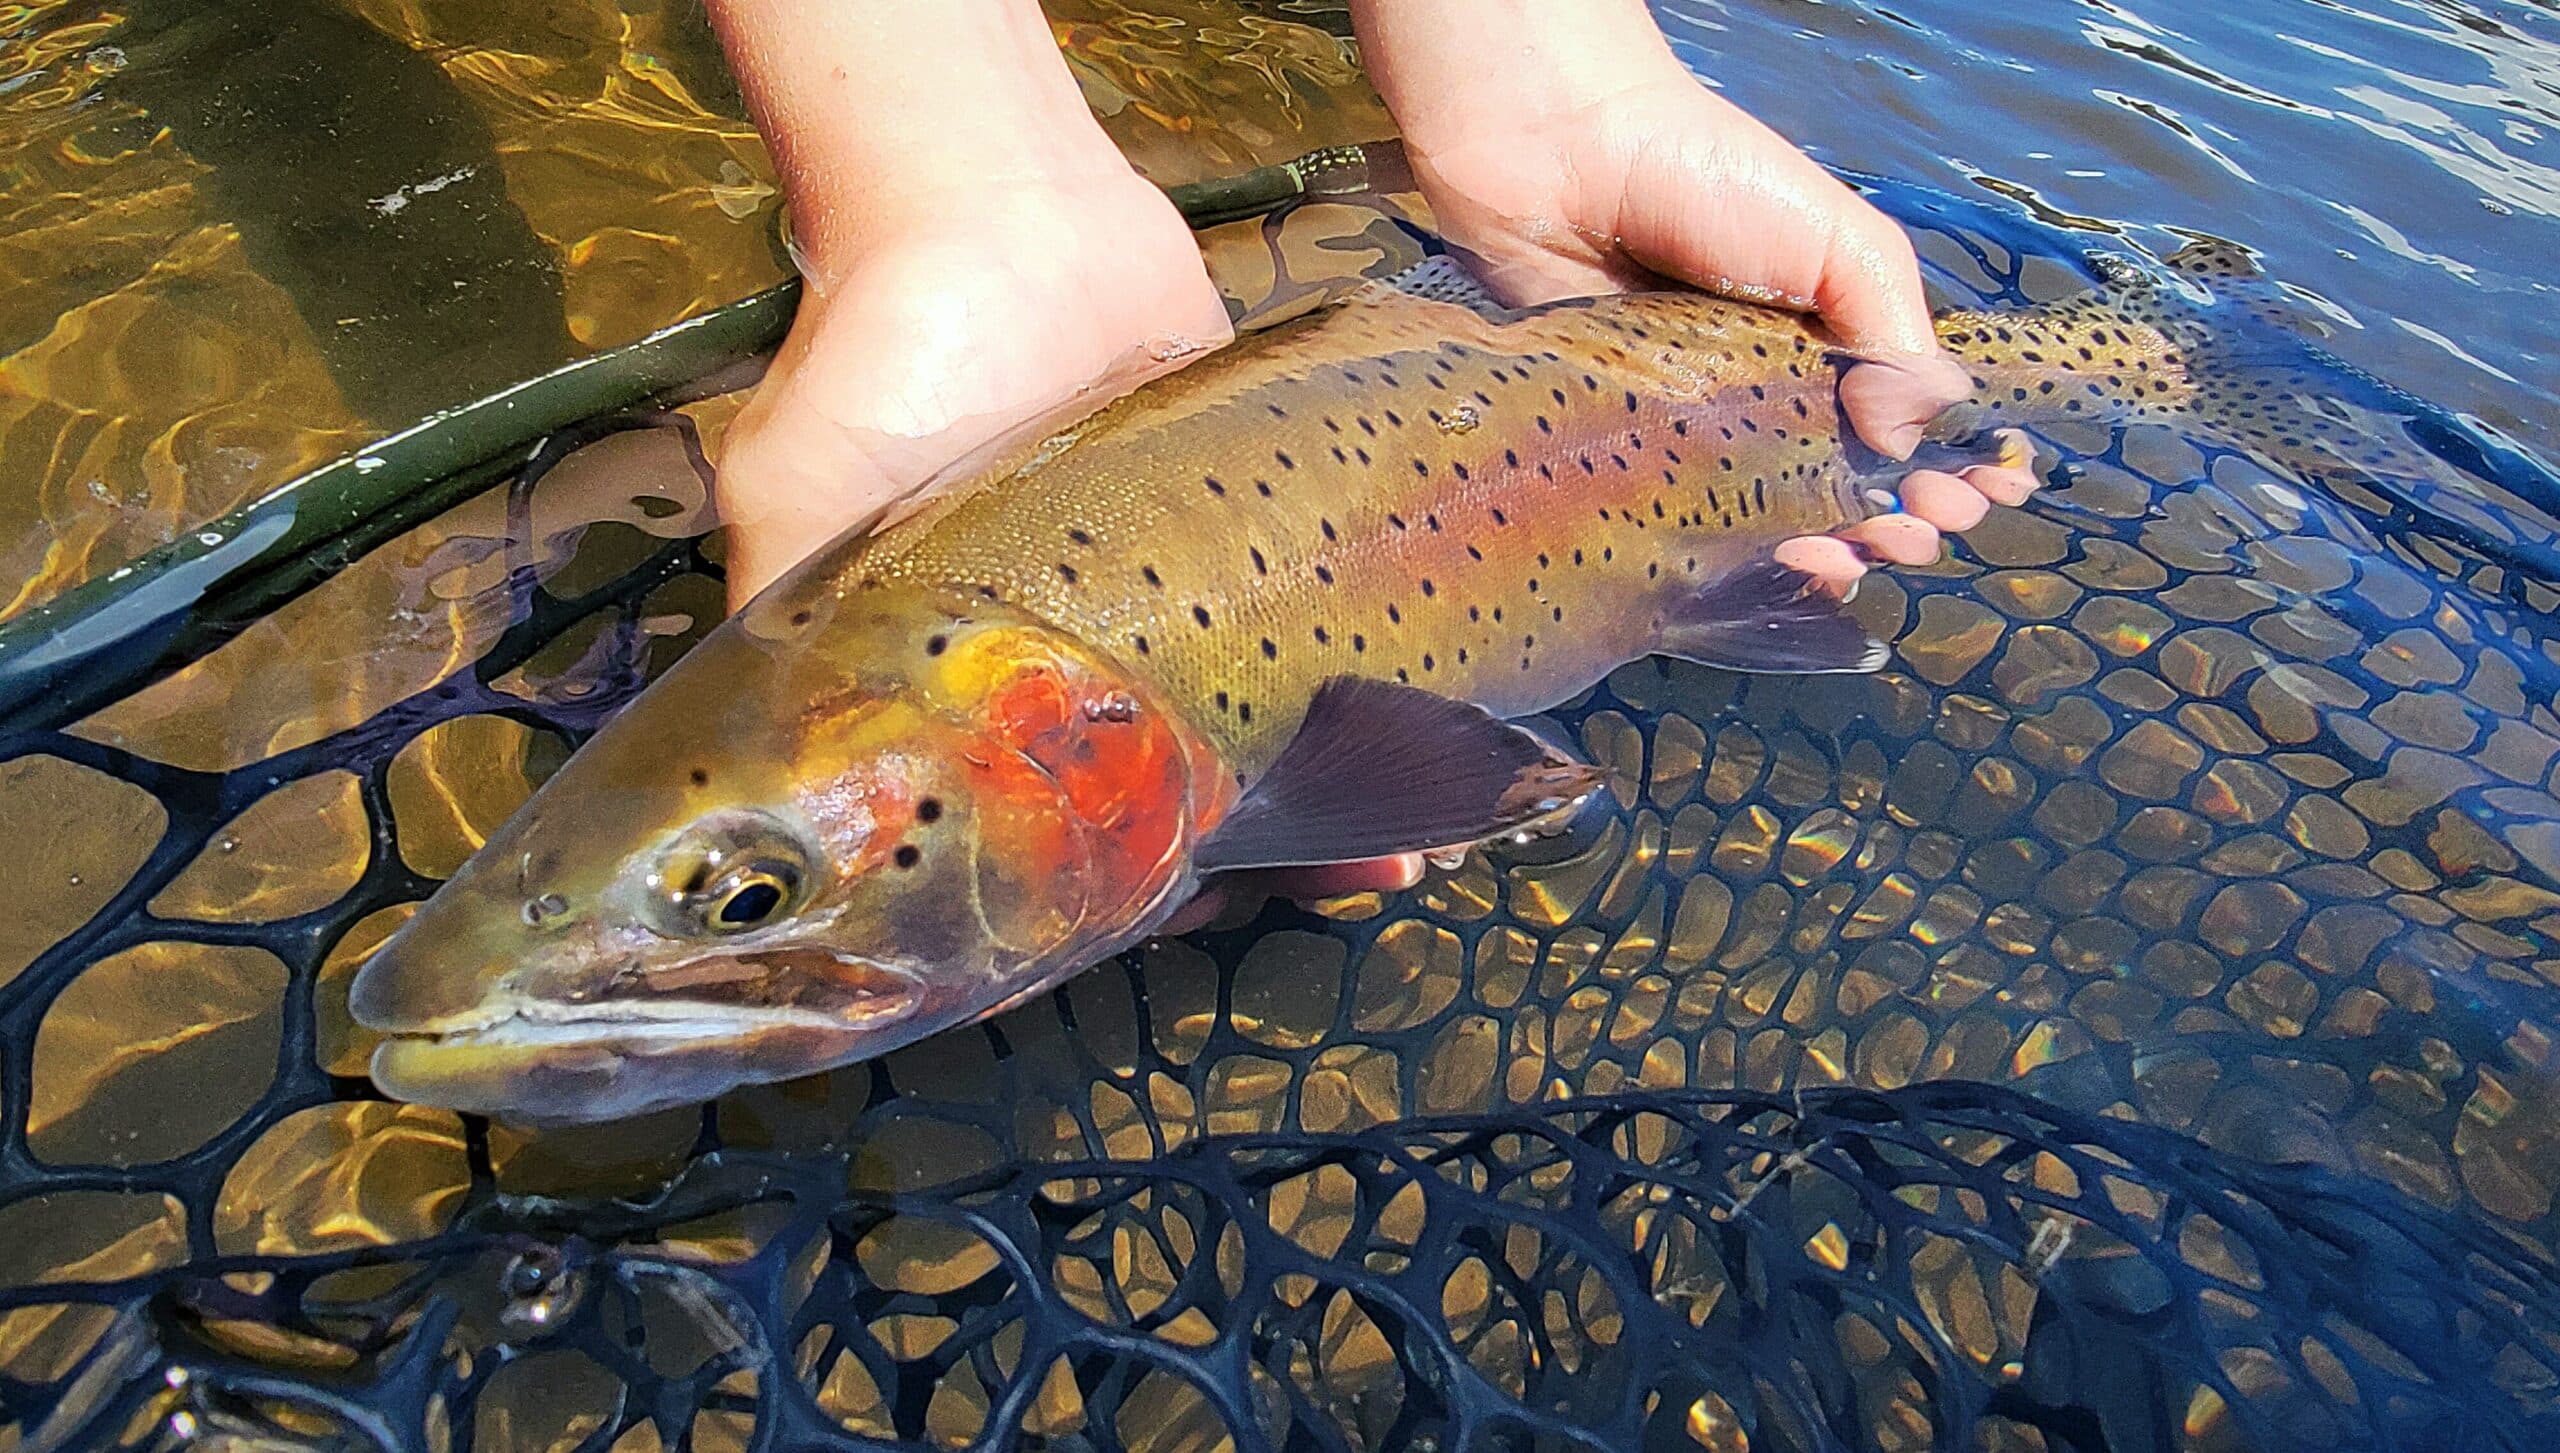 Truckee River Fly Fishing Report- June 22nd - Truckee River Fly Fishing  Guide